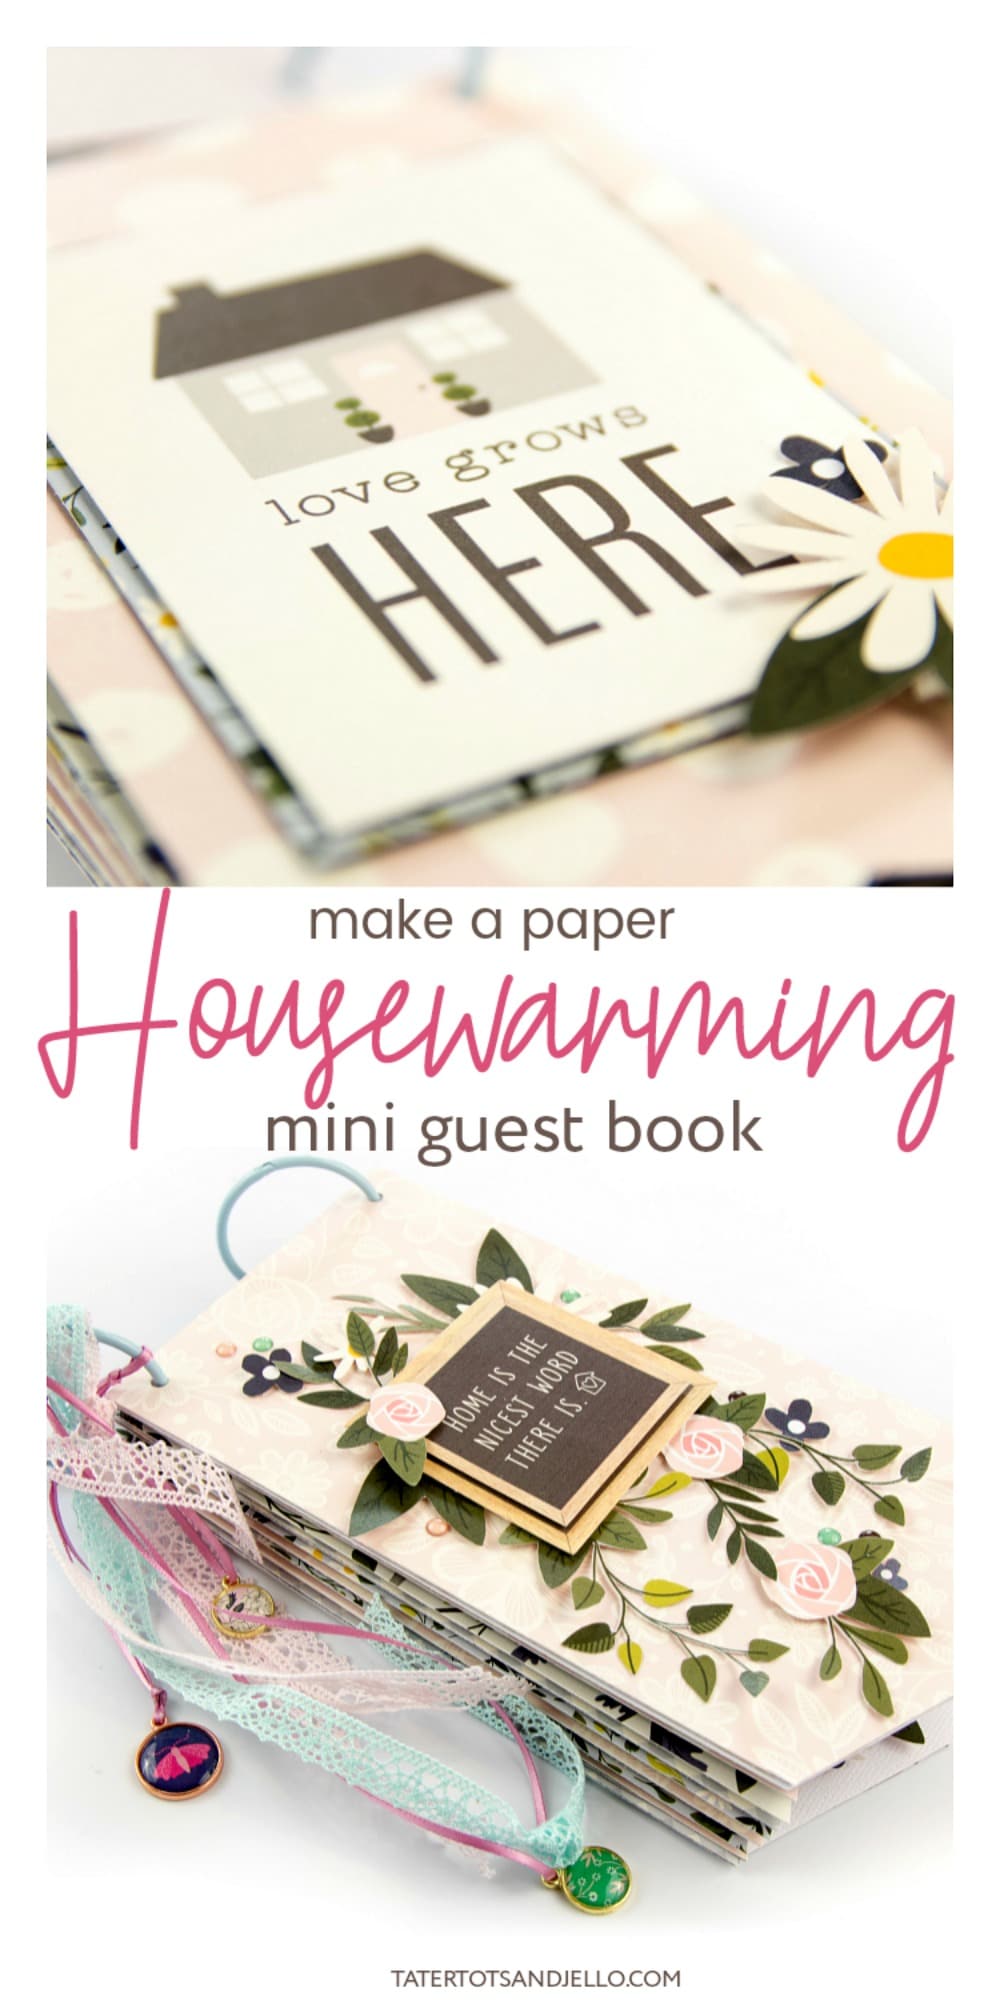 How to make a housewarming paper mini book! Create a beautiful keepsake for your home or as a housewarming gift for a new home. Guests can leave a special memory or photo of the time they visit! ﻿